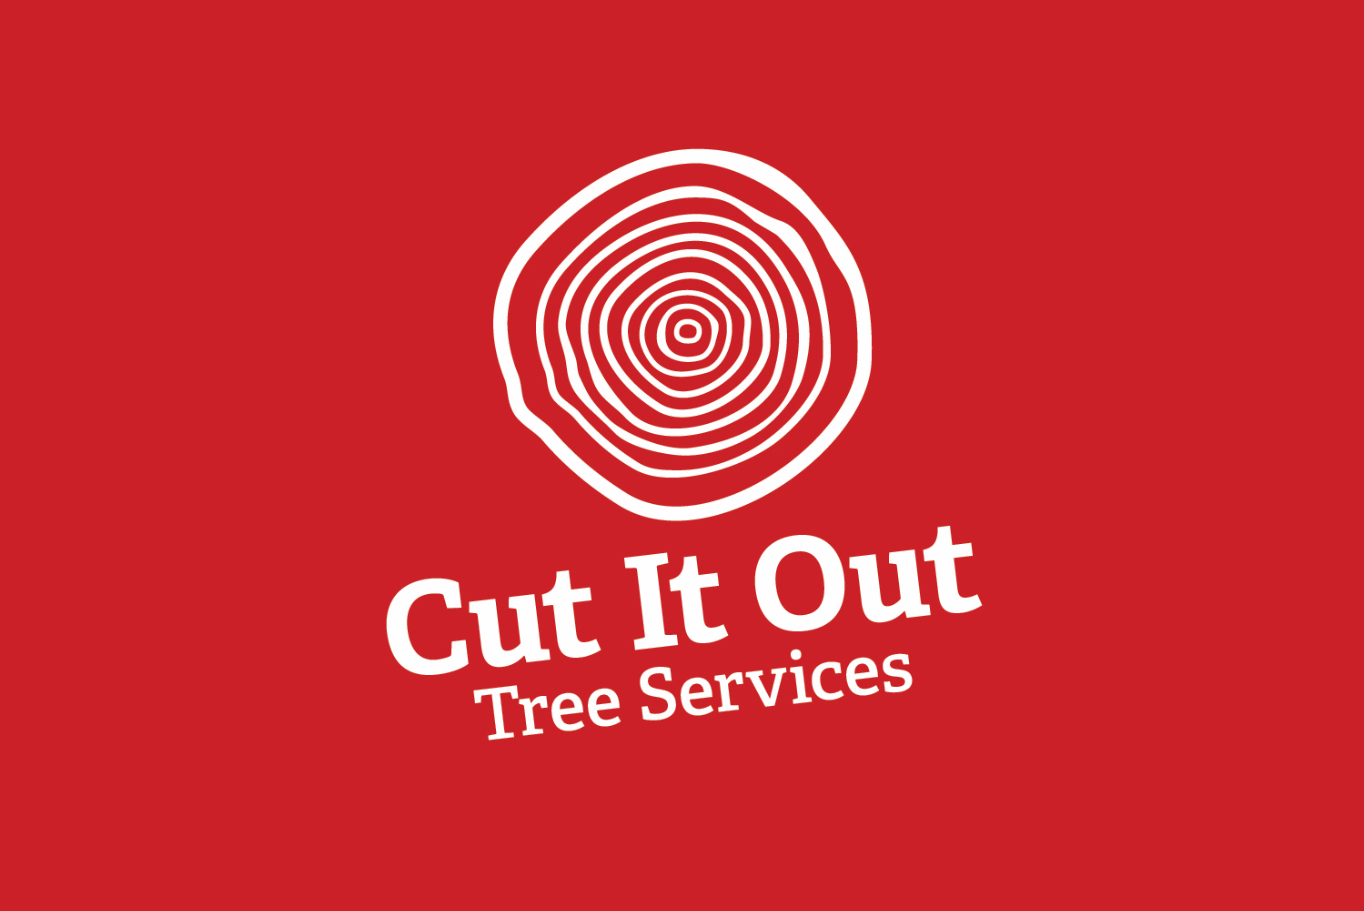 Cut-it-out Tree Services Logo | Brand Design